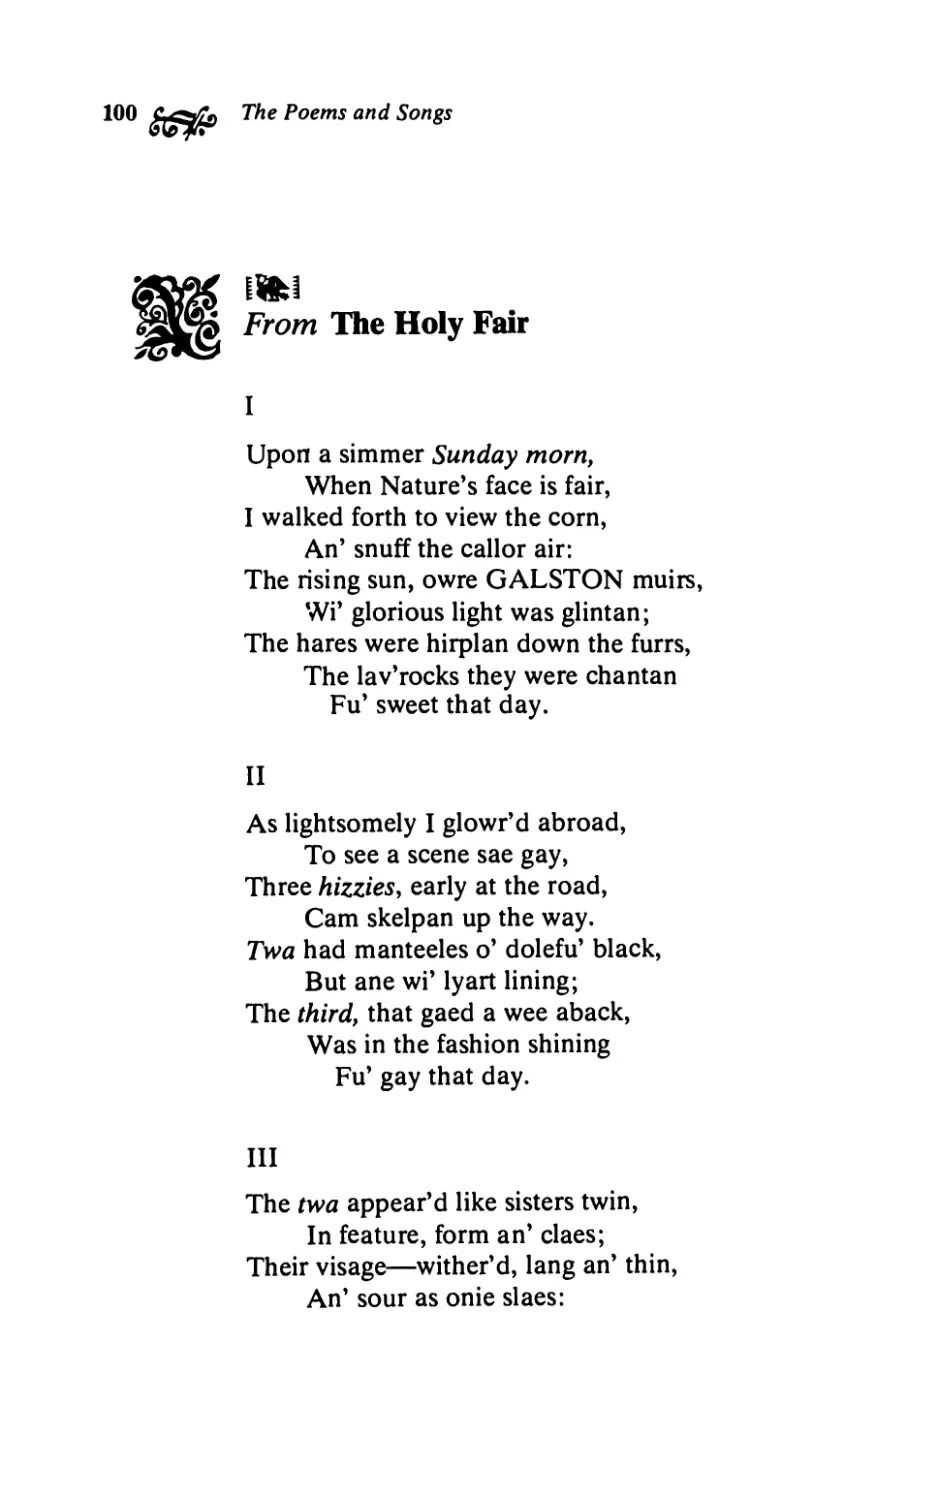 From The Holy Fair